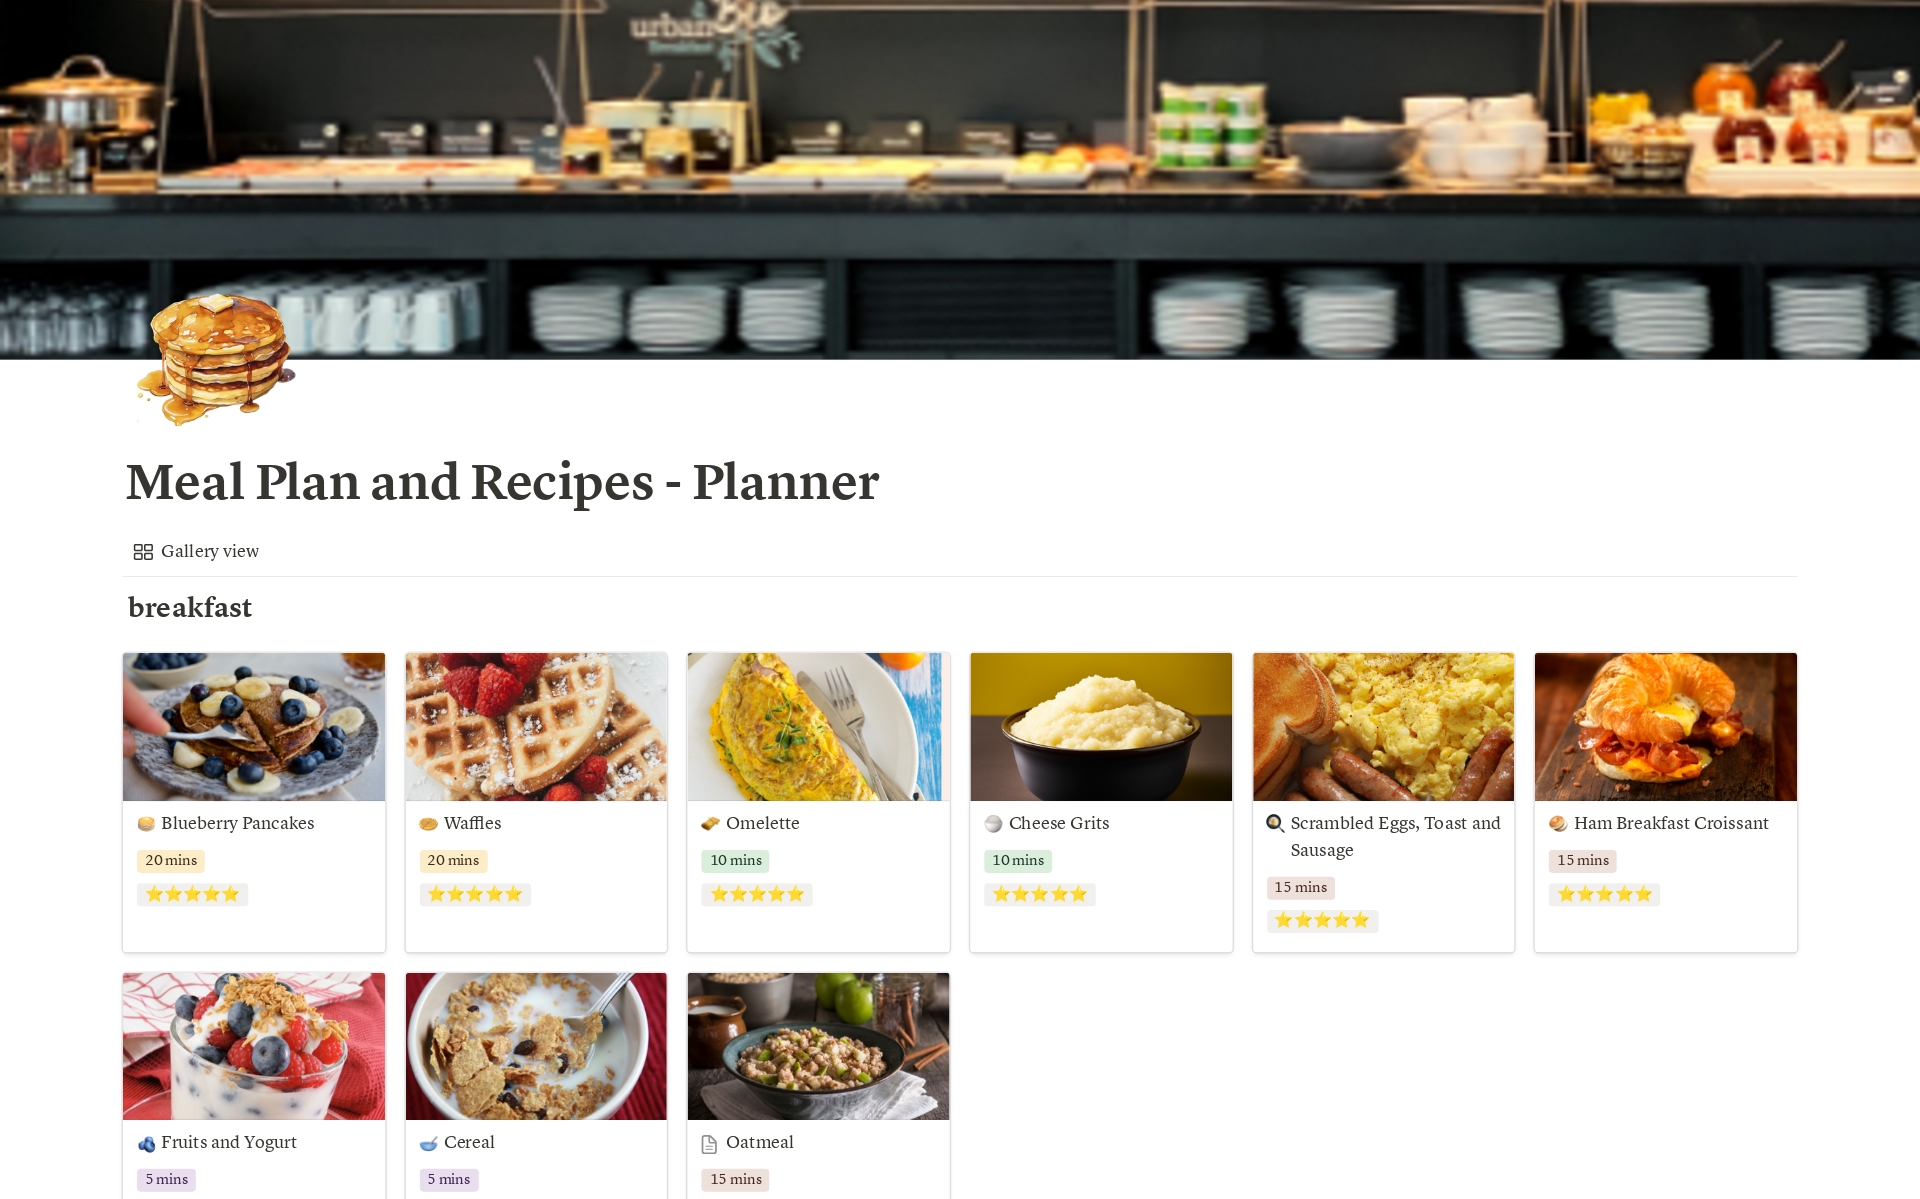 This Notion meal plan and recipes organizer simplifies meal planning for college students with an easy interface for inputting meal details, inspiring sample foods, and efficient meal preparation.